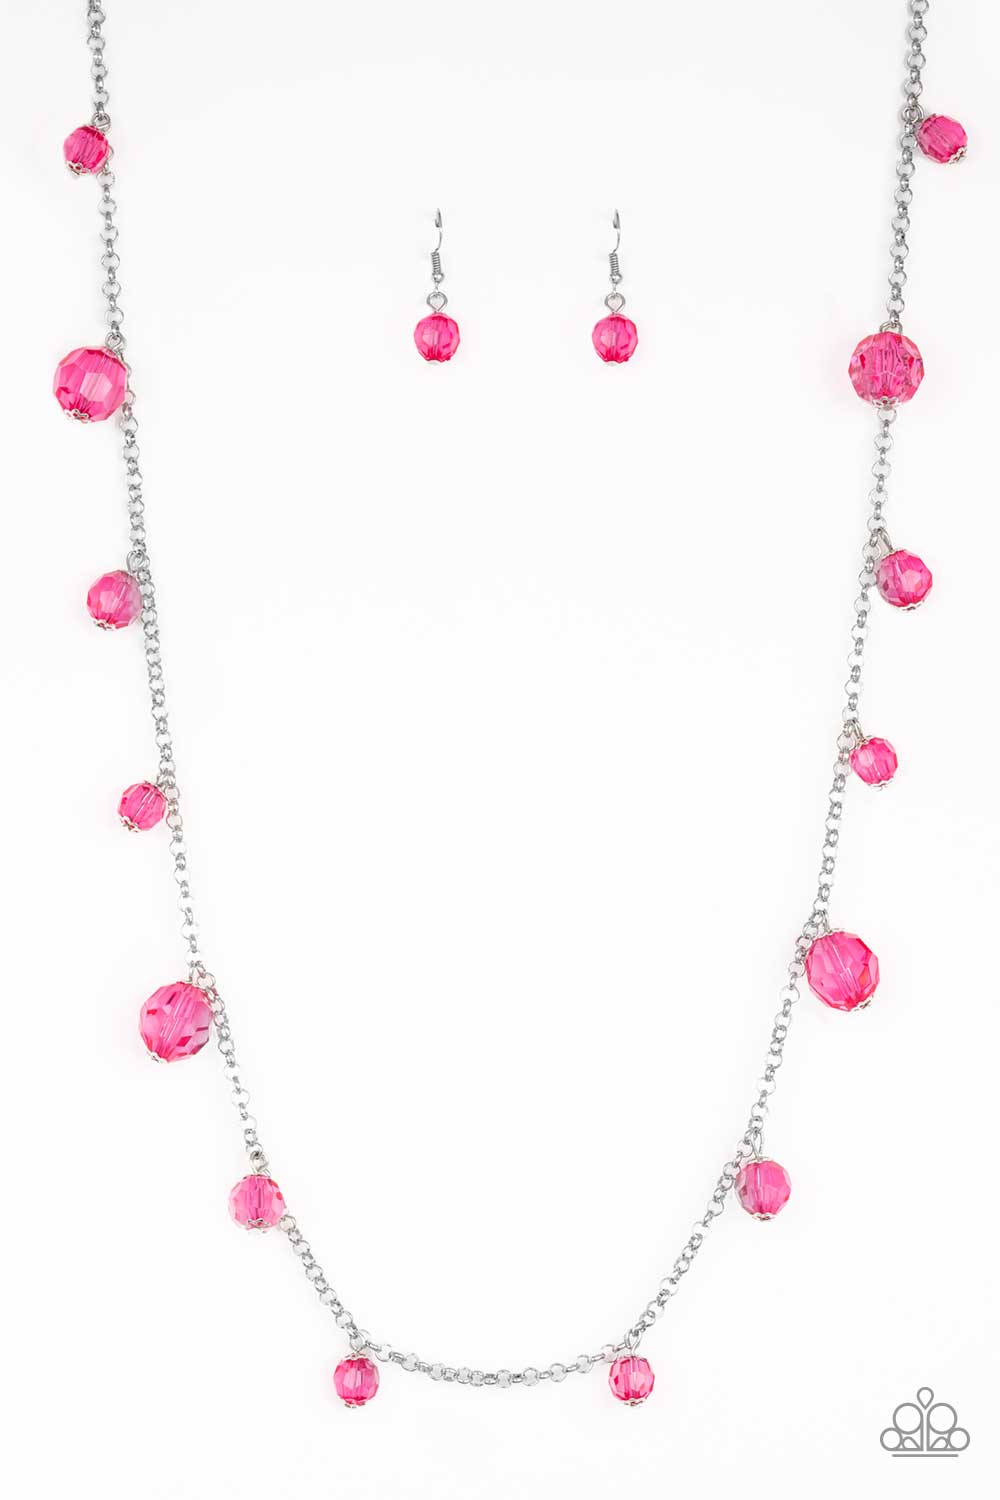 GLOW-Rider Pink Necklace - Paparazzi Accessories - lightbox -CarasShop.com - $5 Jewelry by Cara Jewels